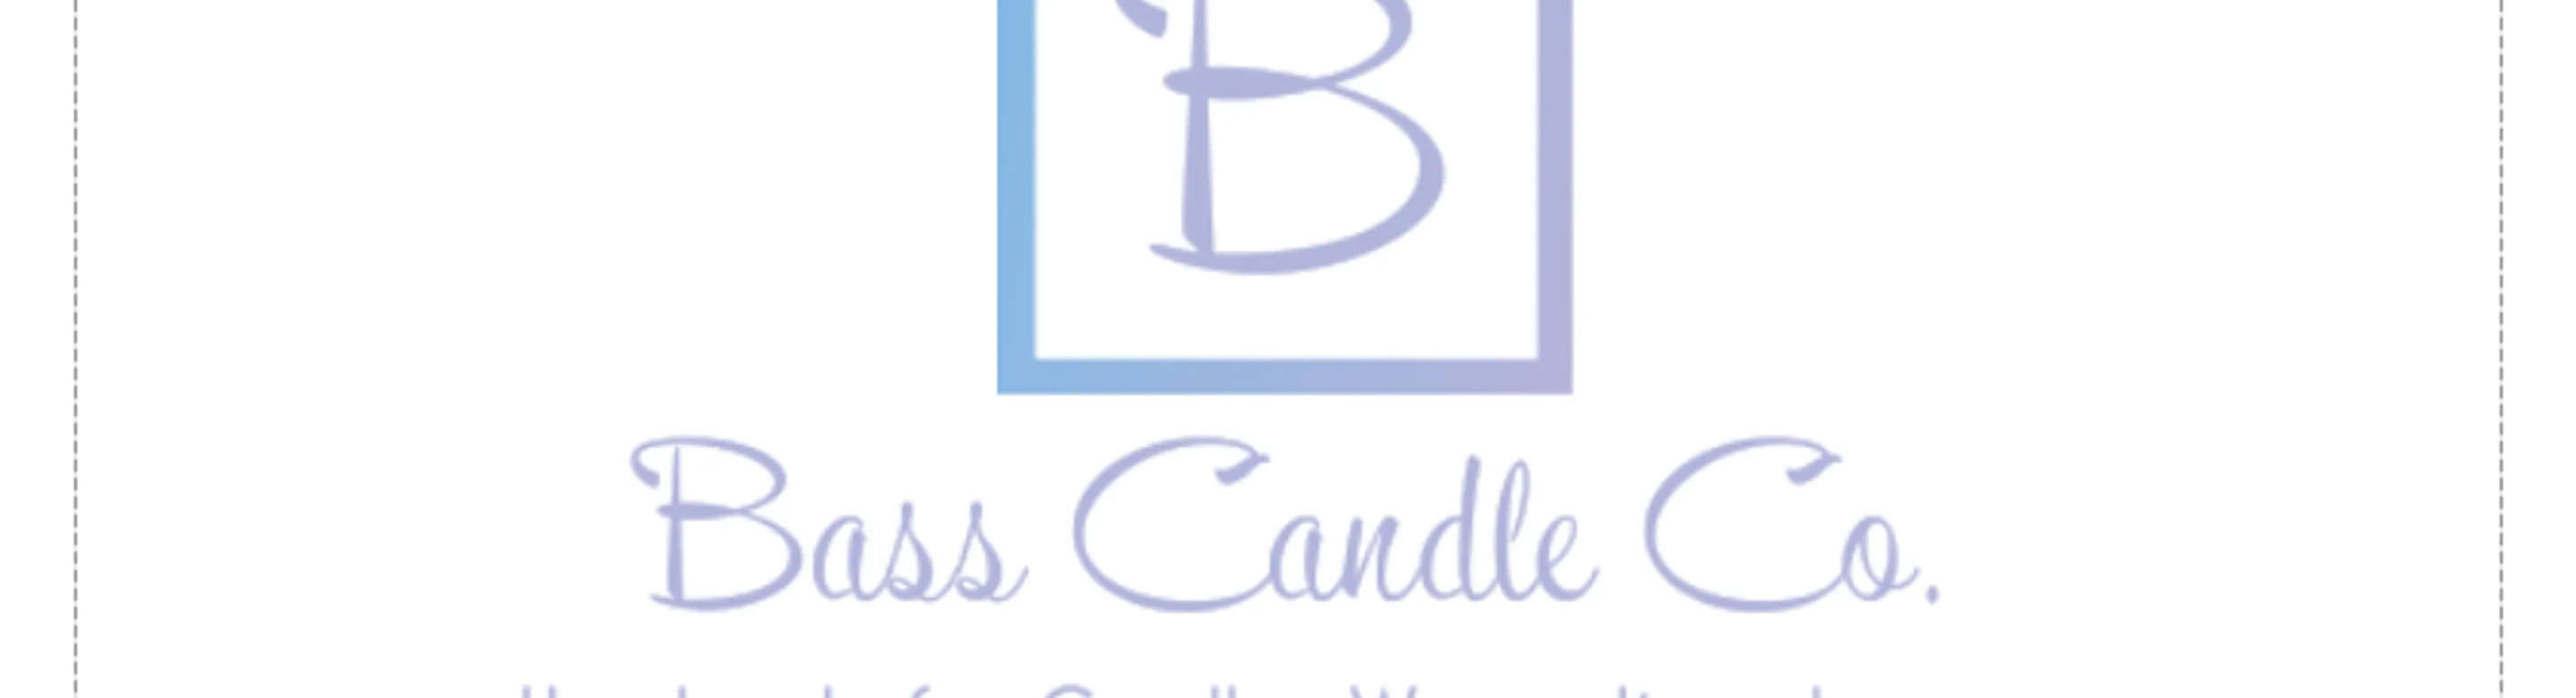 Bass Candle Co